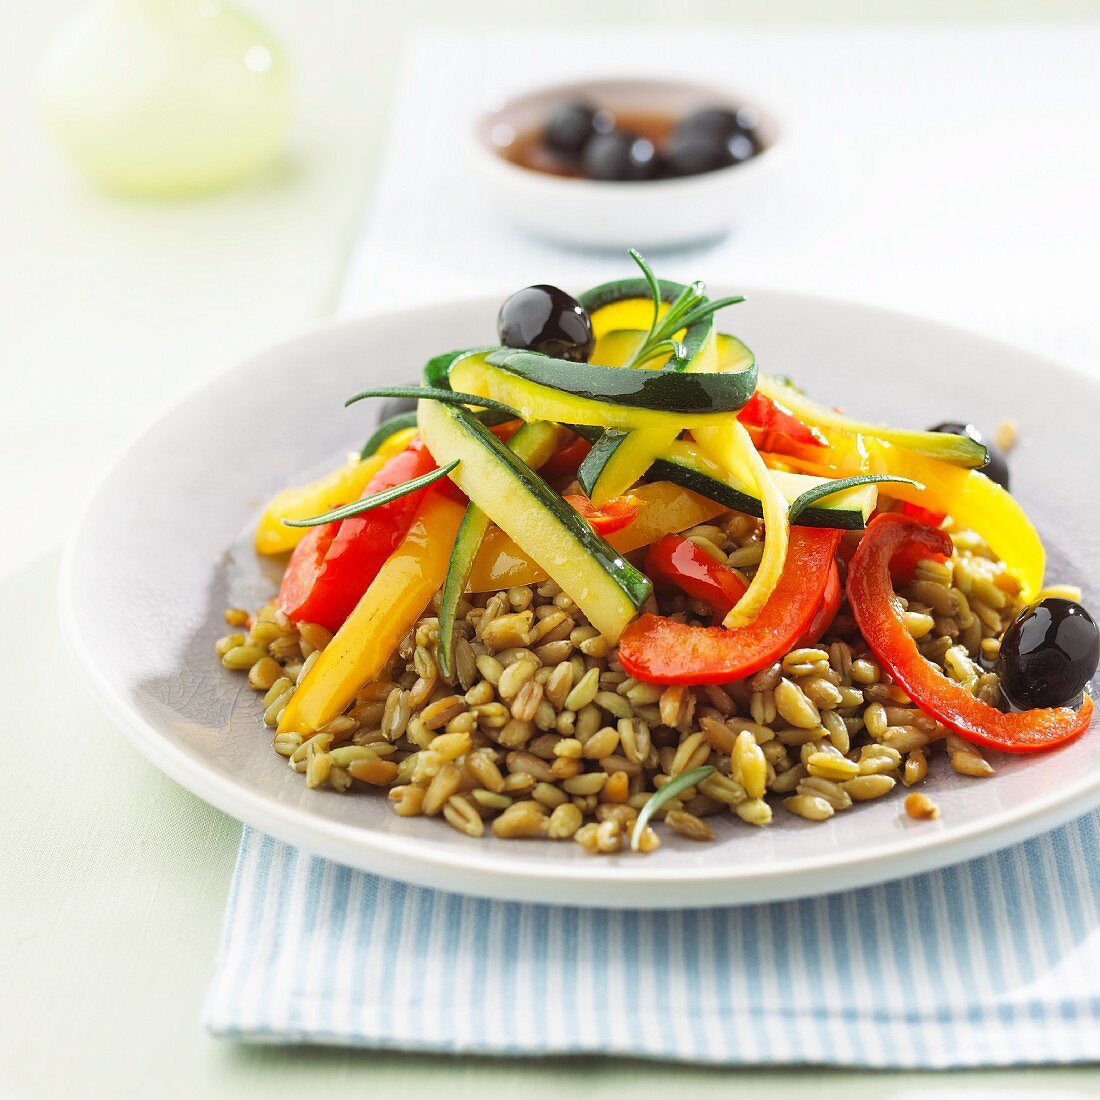 A salad made with unripe spelt grains with pepper and courgette